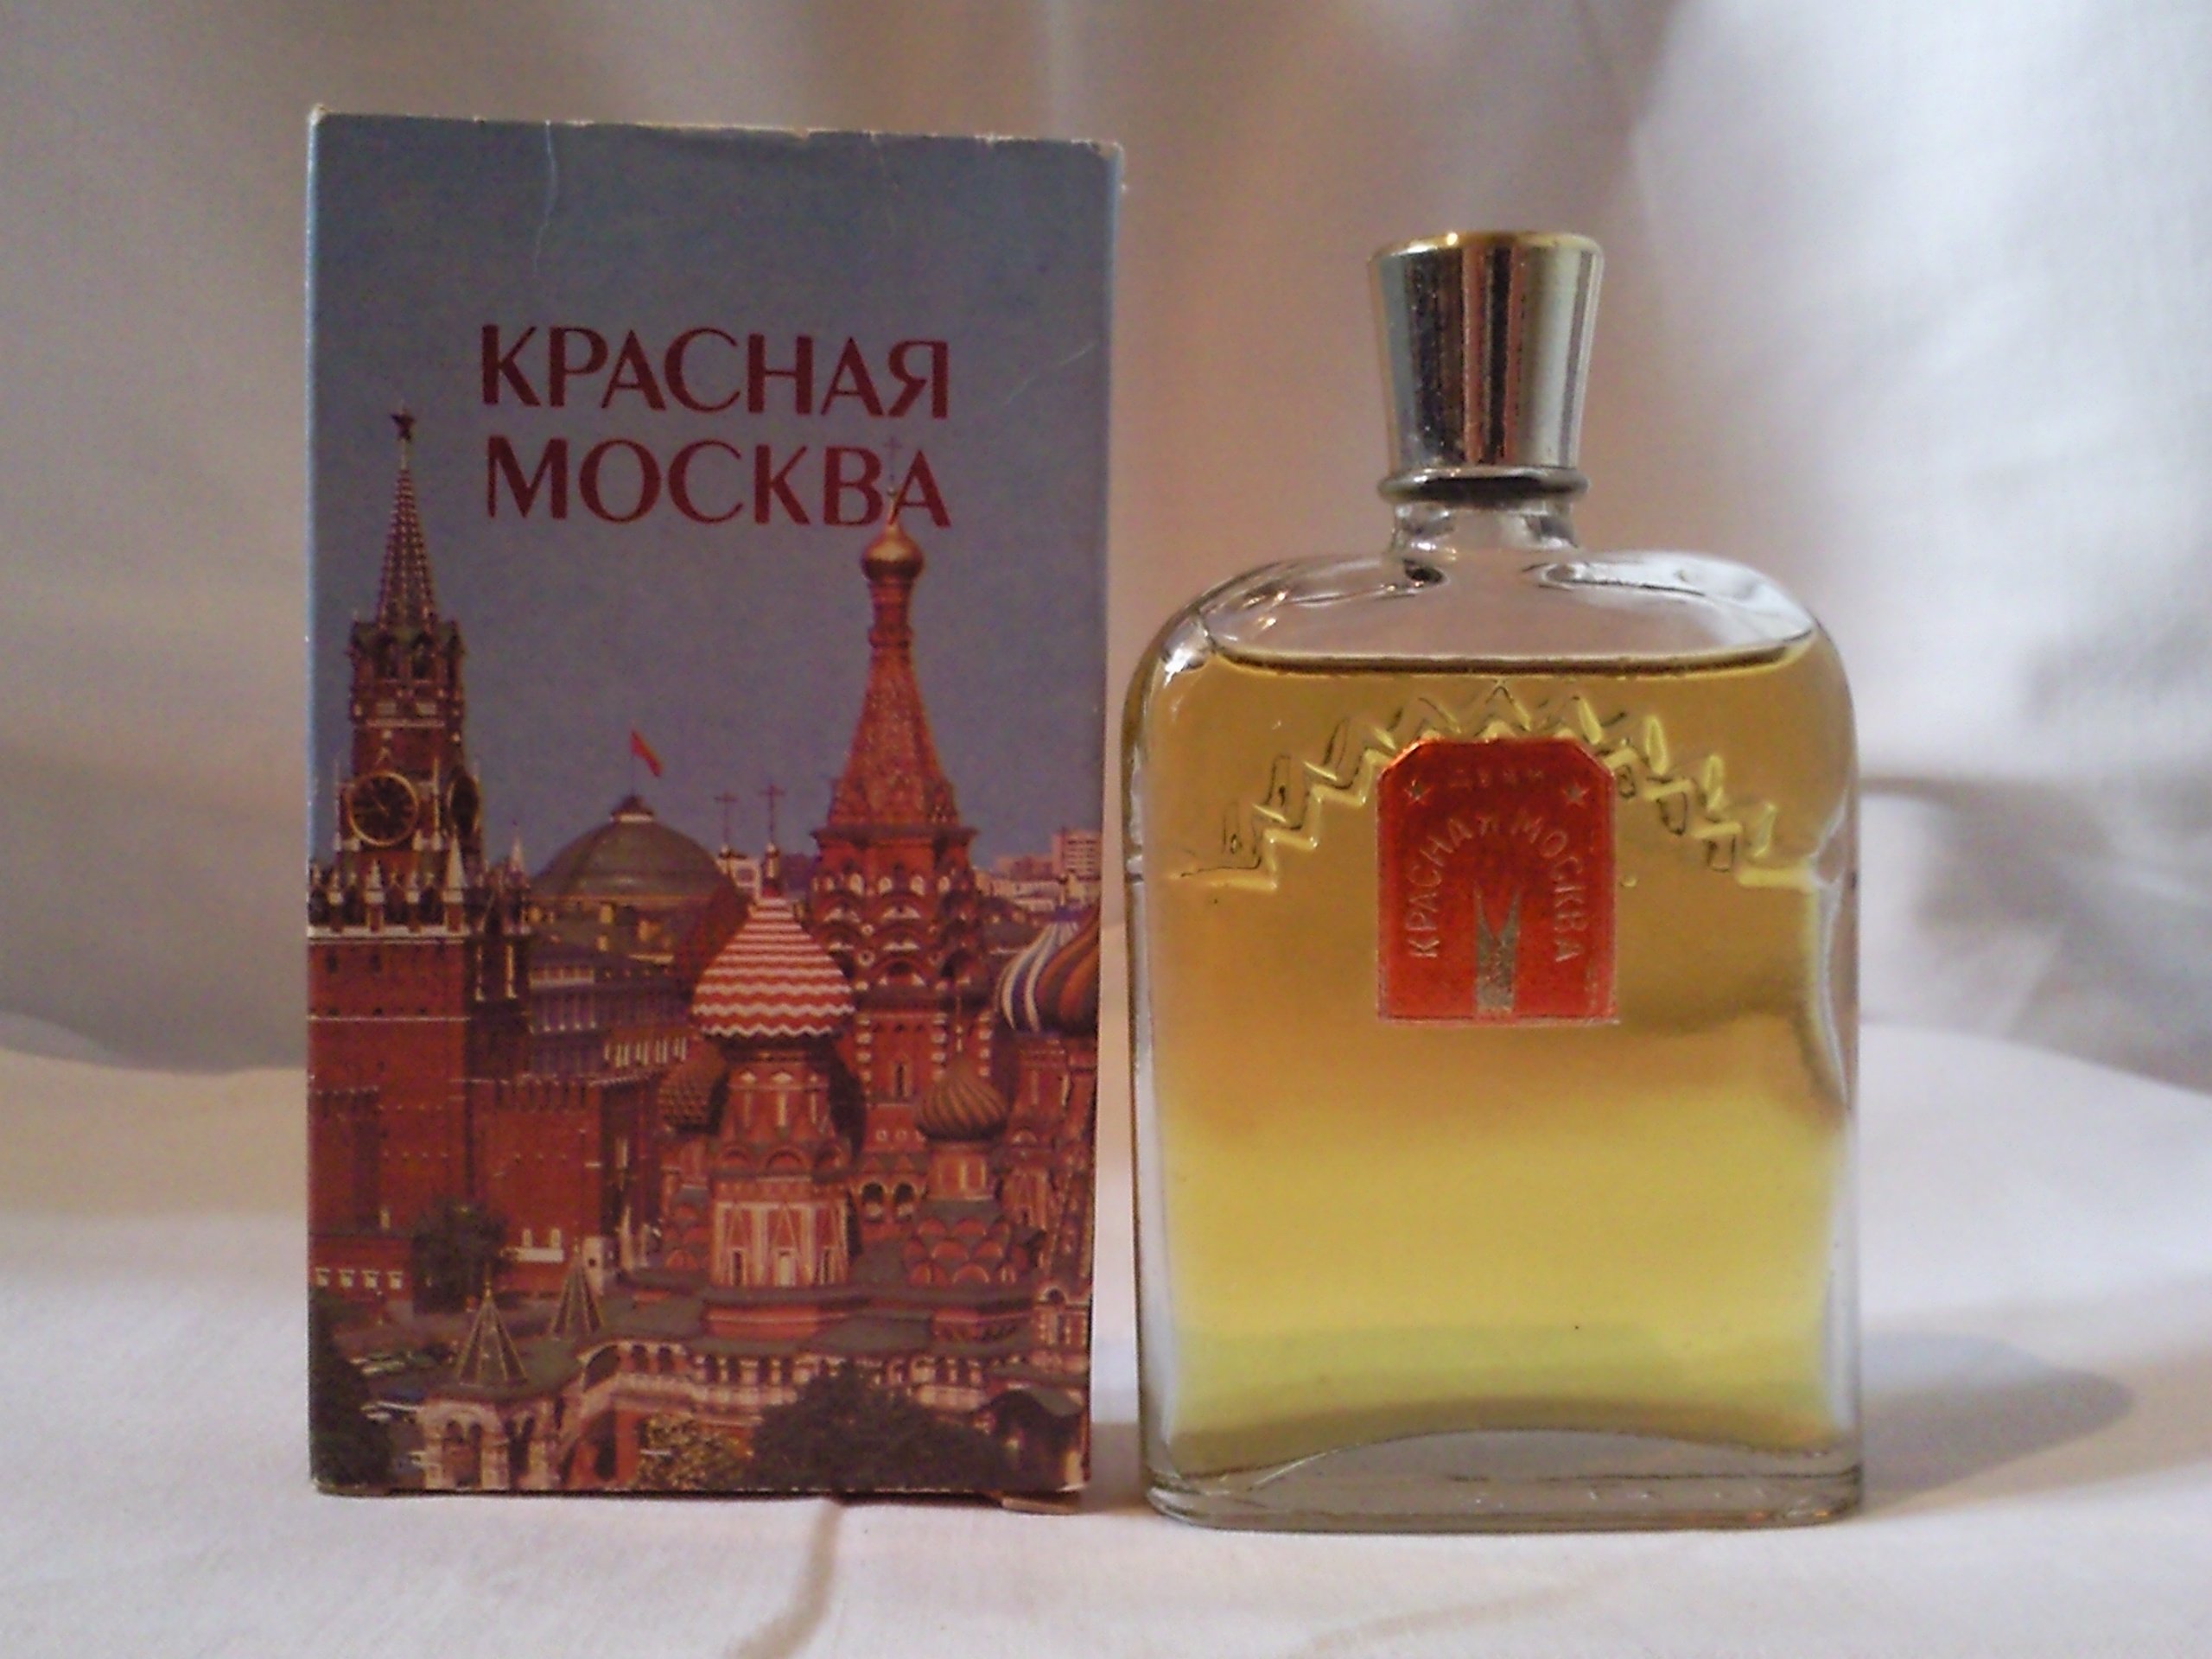 Opinion: Gosha Rubchinskiy's new perfume is a sign of the times for underground culture